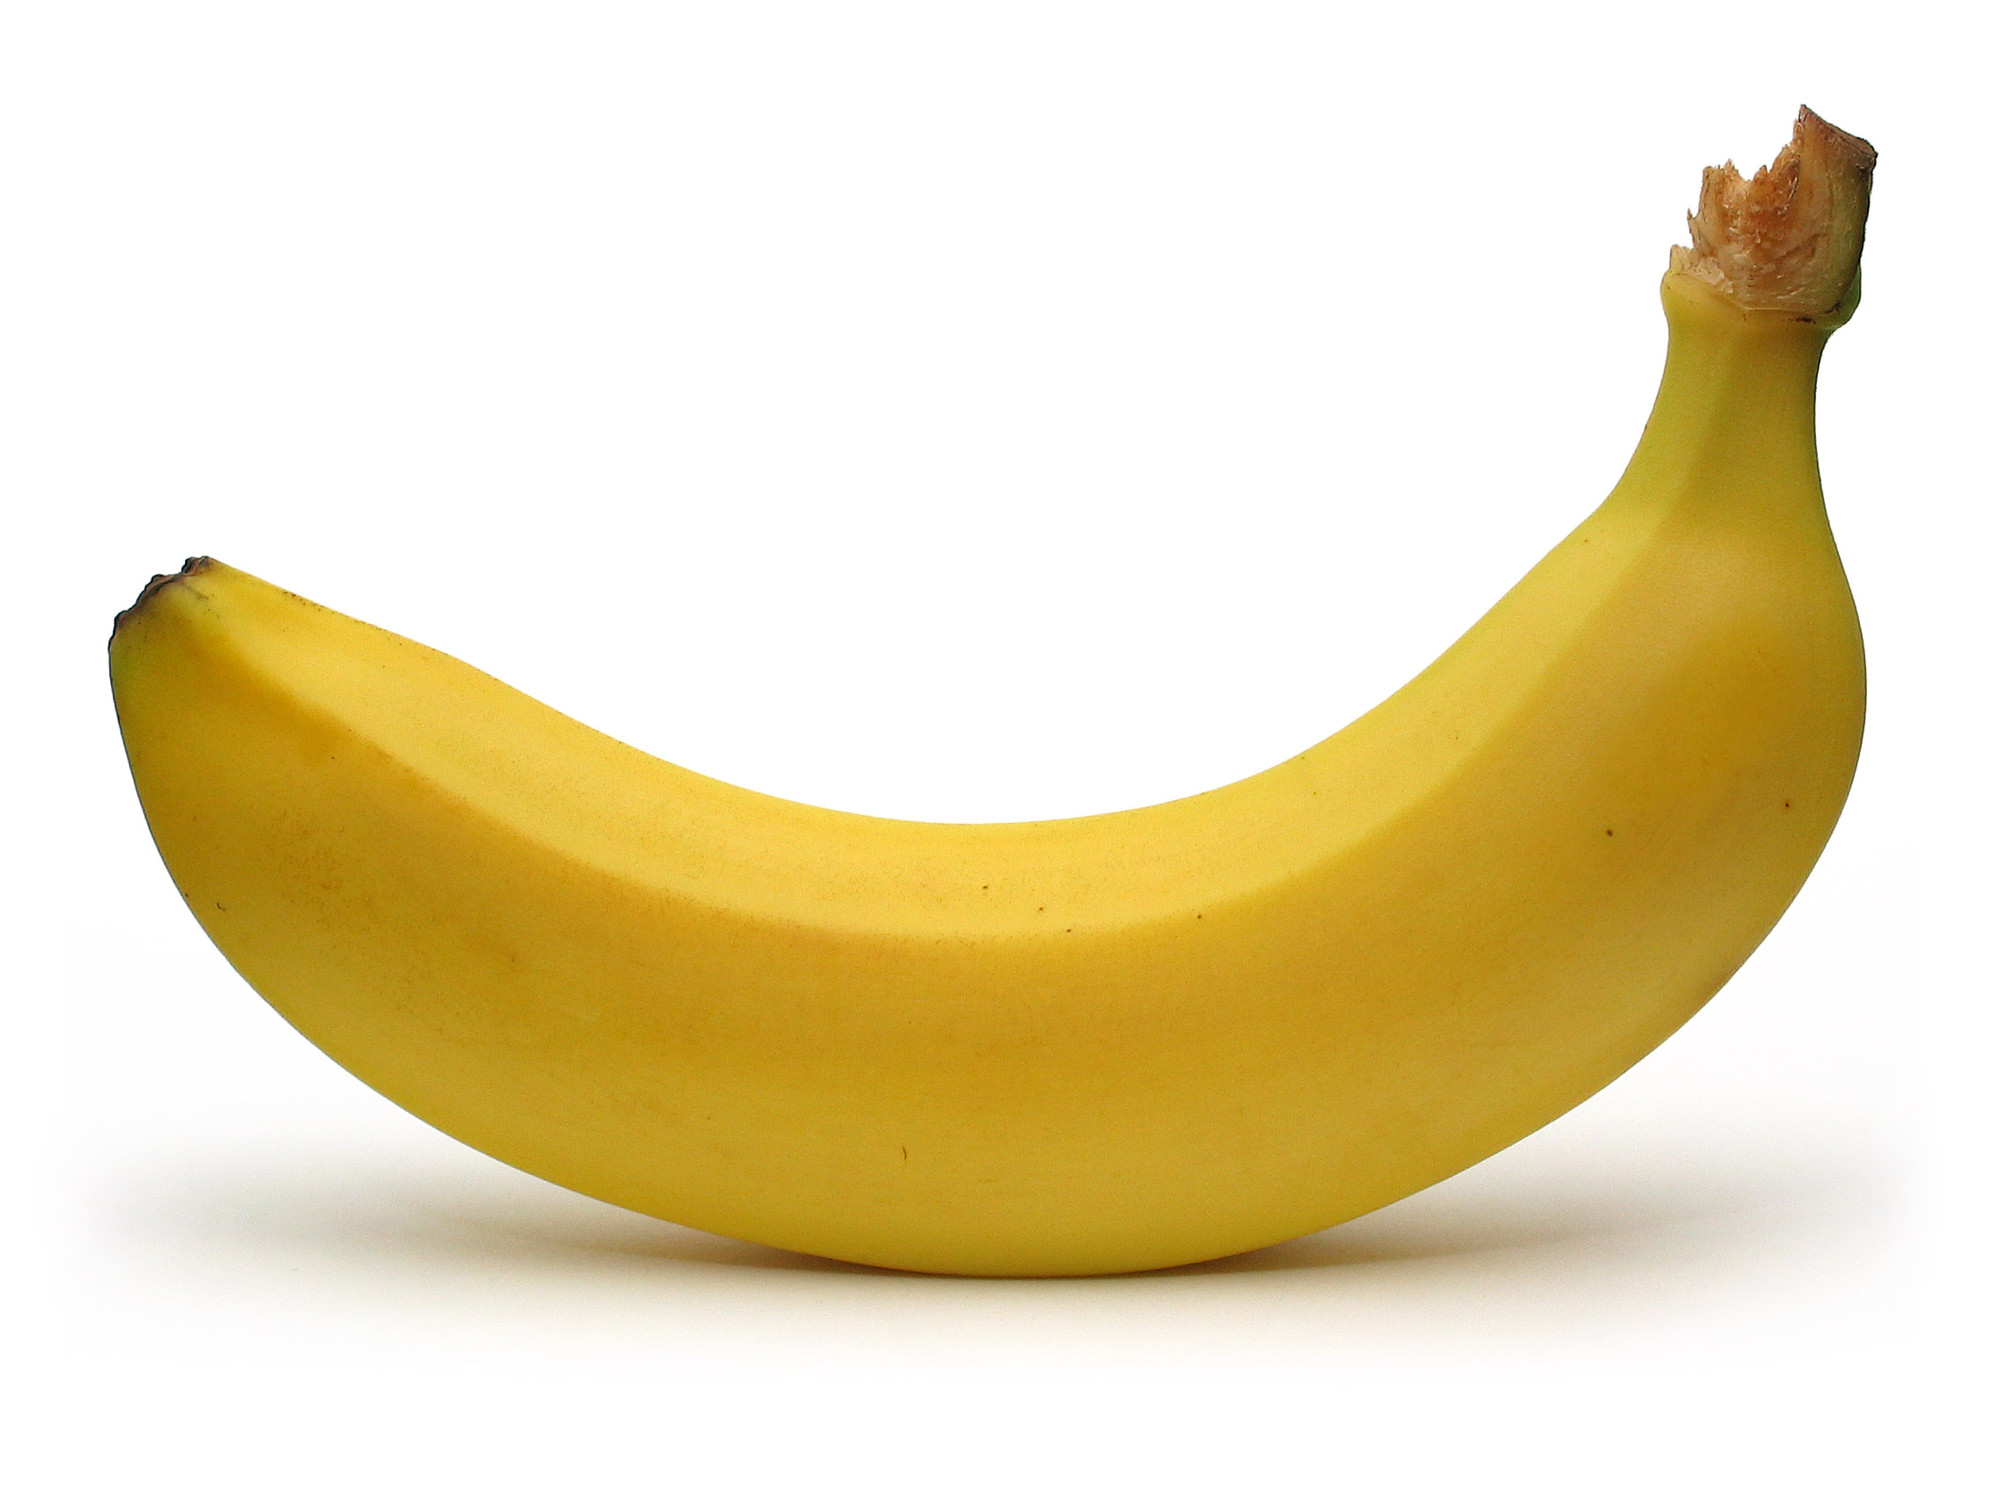 30+ Banana HD Wallpapers and Backgrounds